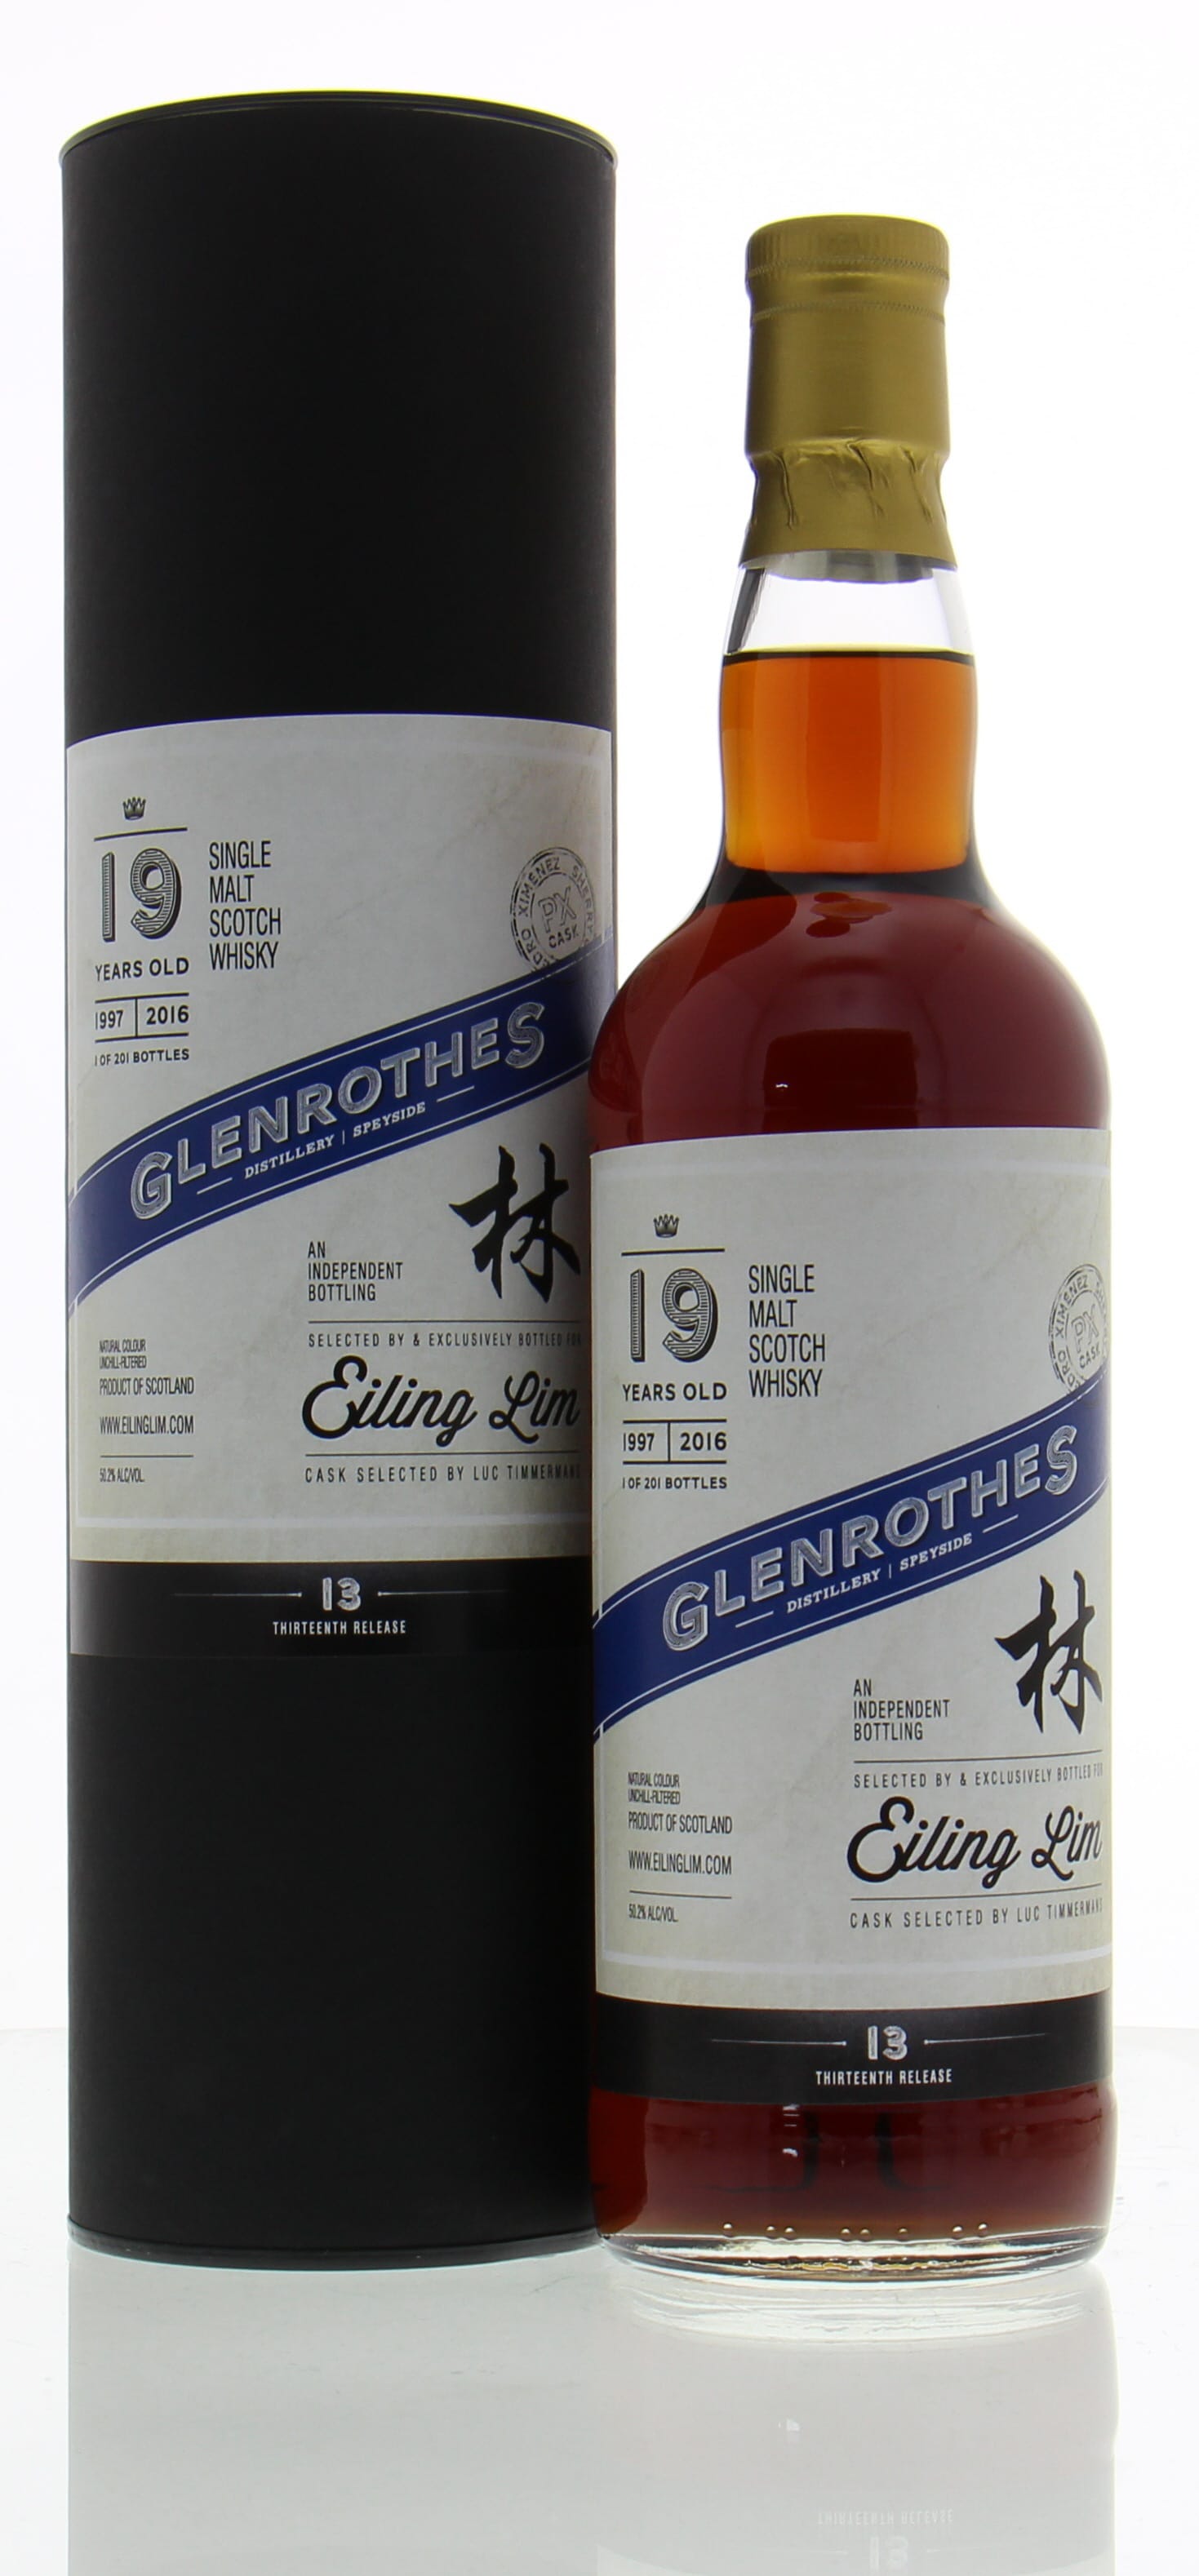 Glenrothes - 19 Years Old Eiling Lim 13th Release 50.2% 1997 Perfect